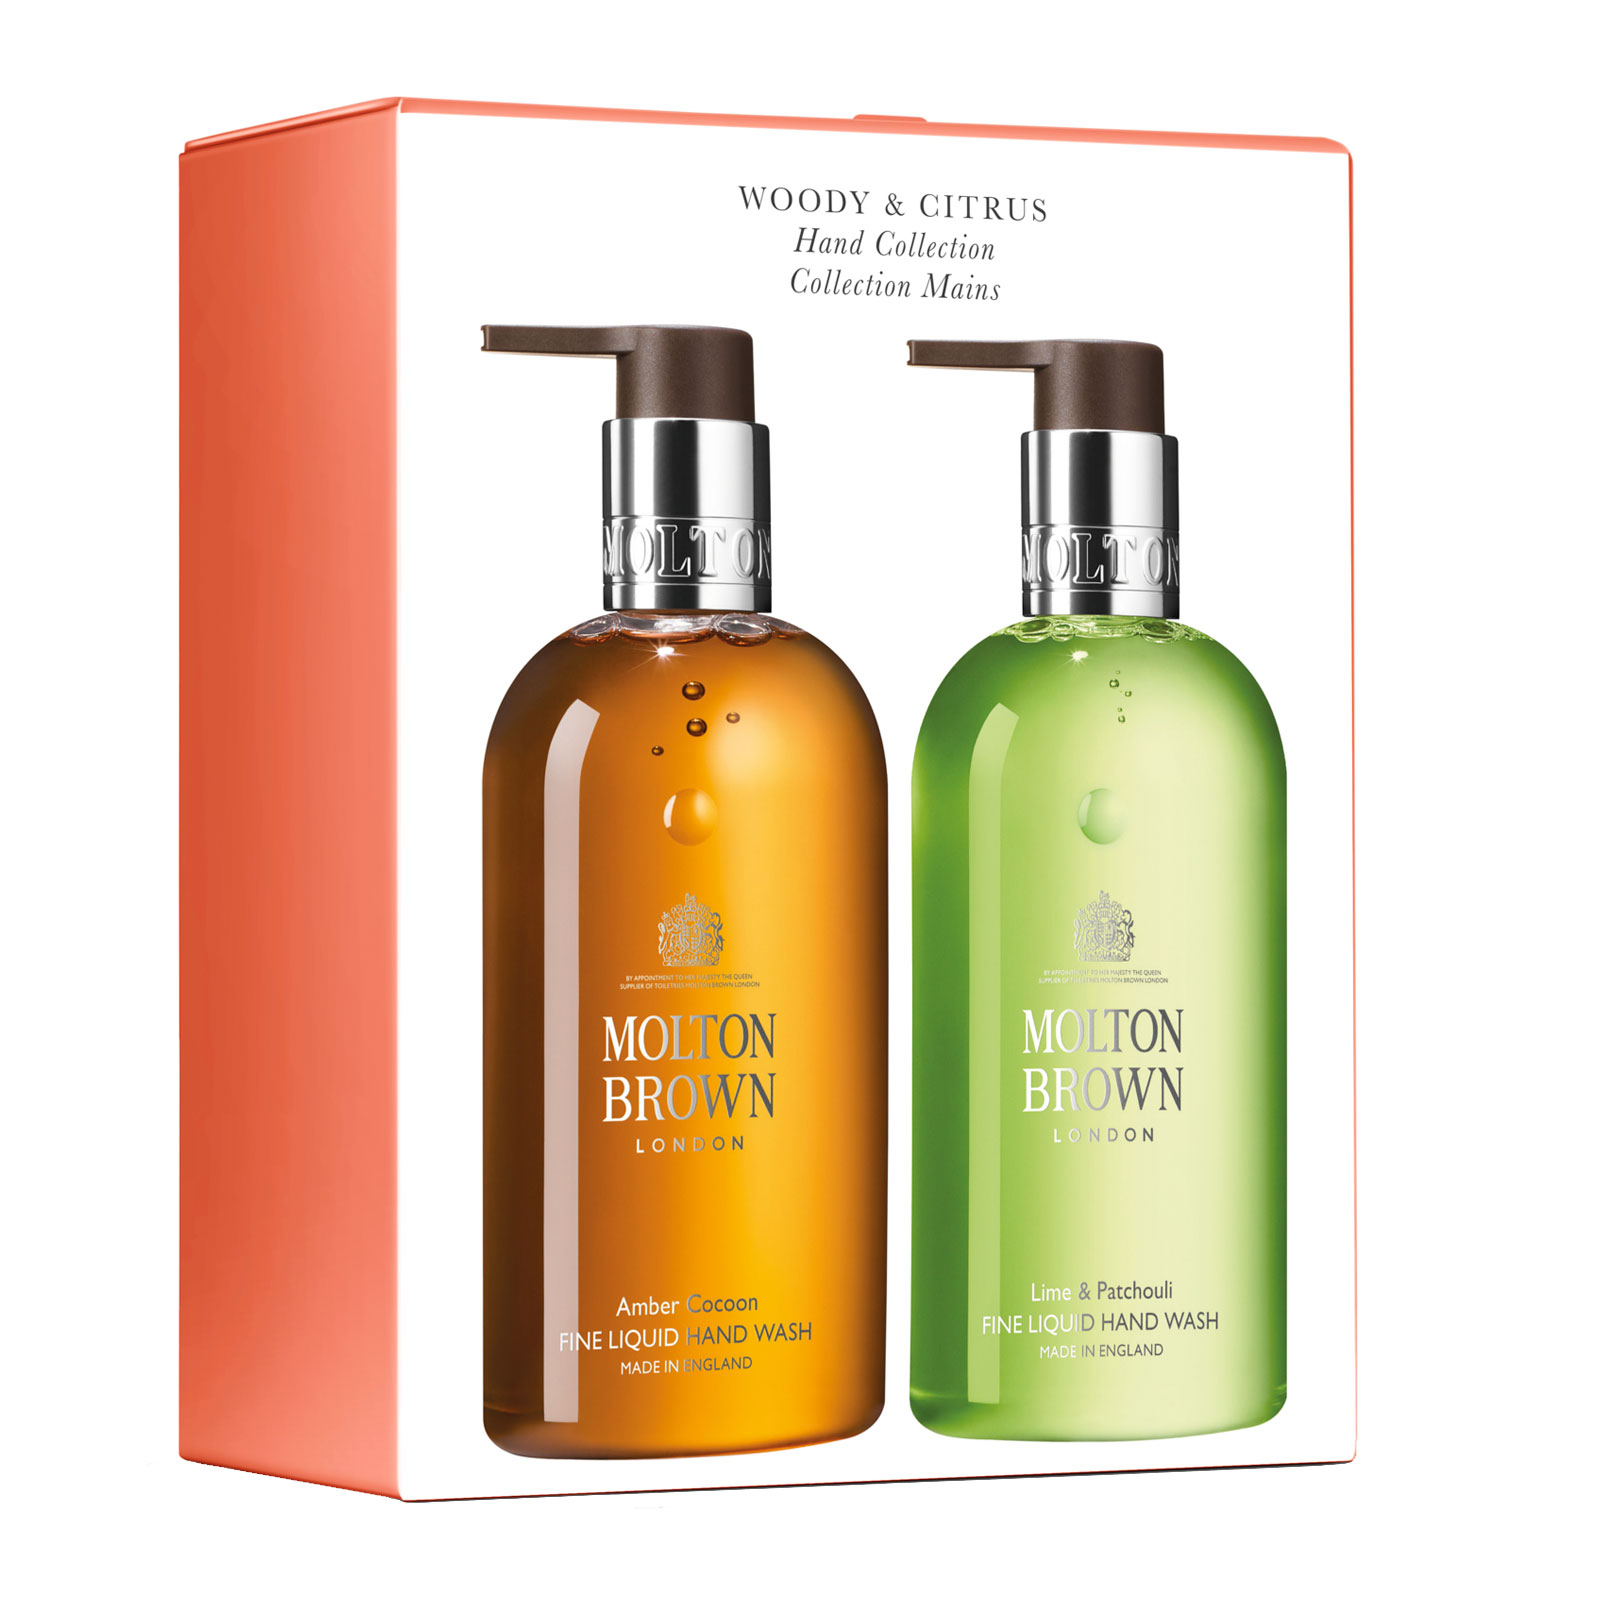 Molton Brown Woody & Citrus Hand Collection